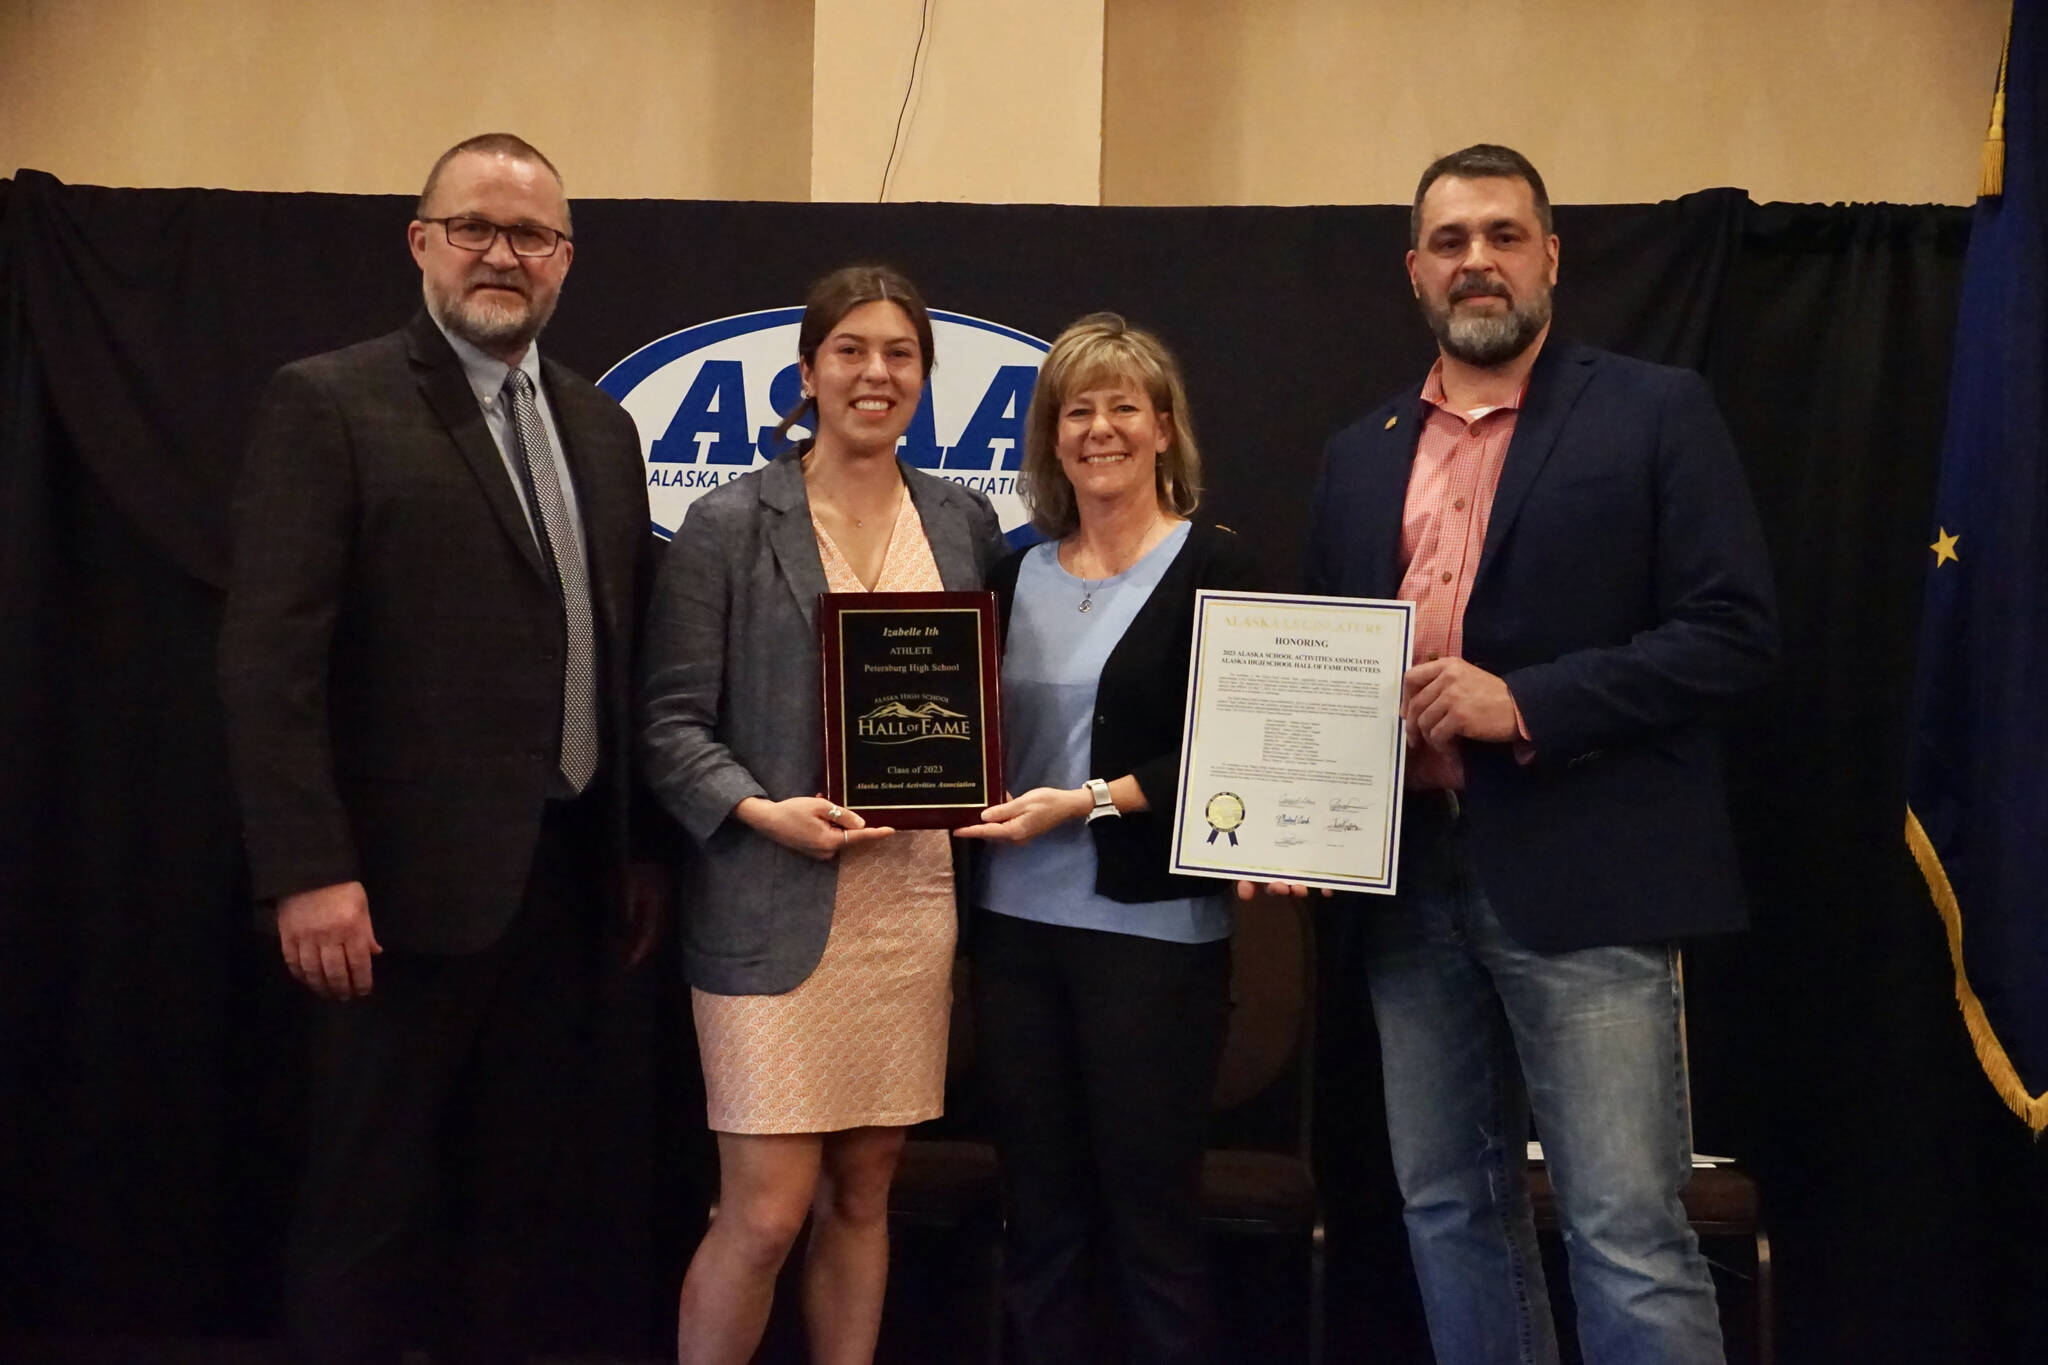 Izabelle Ith, second from left, poses with her Alaska High School Hall of Fame plaque. At left is ASAA Executive Director Billy Strickland. Second from right is Jo Ann Day, who nominated Ith for the honor. At right is Alaska state Rep. Mike Cronk who presented Ith with a legislative citation. (Brad Potter / ASAA)